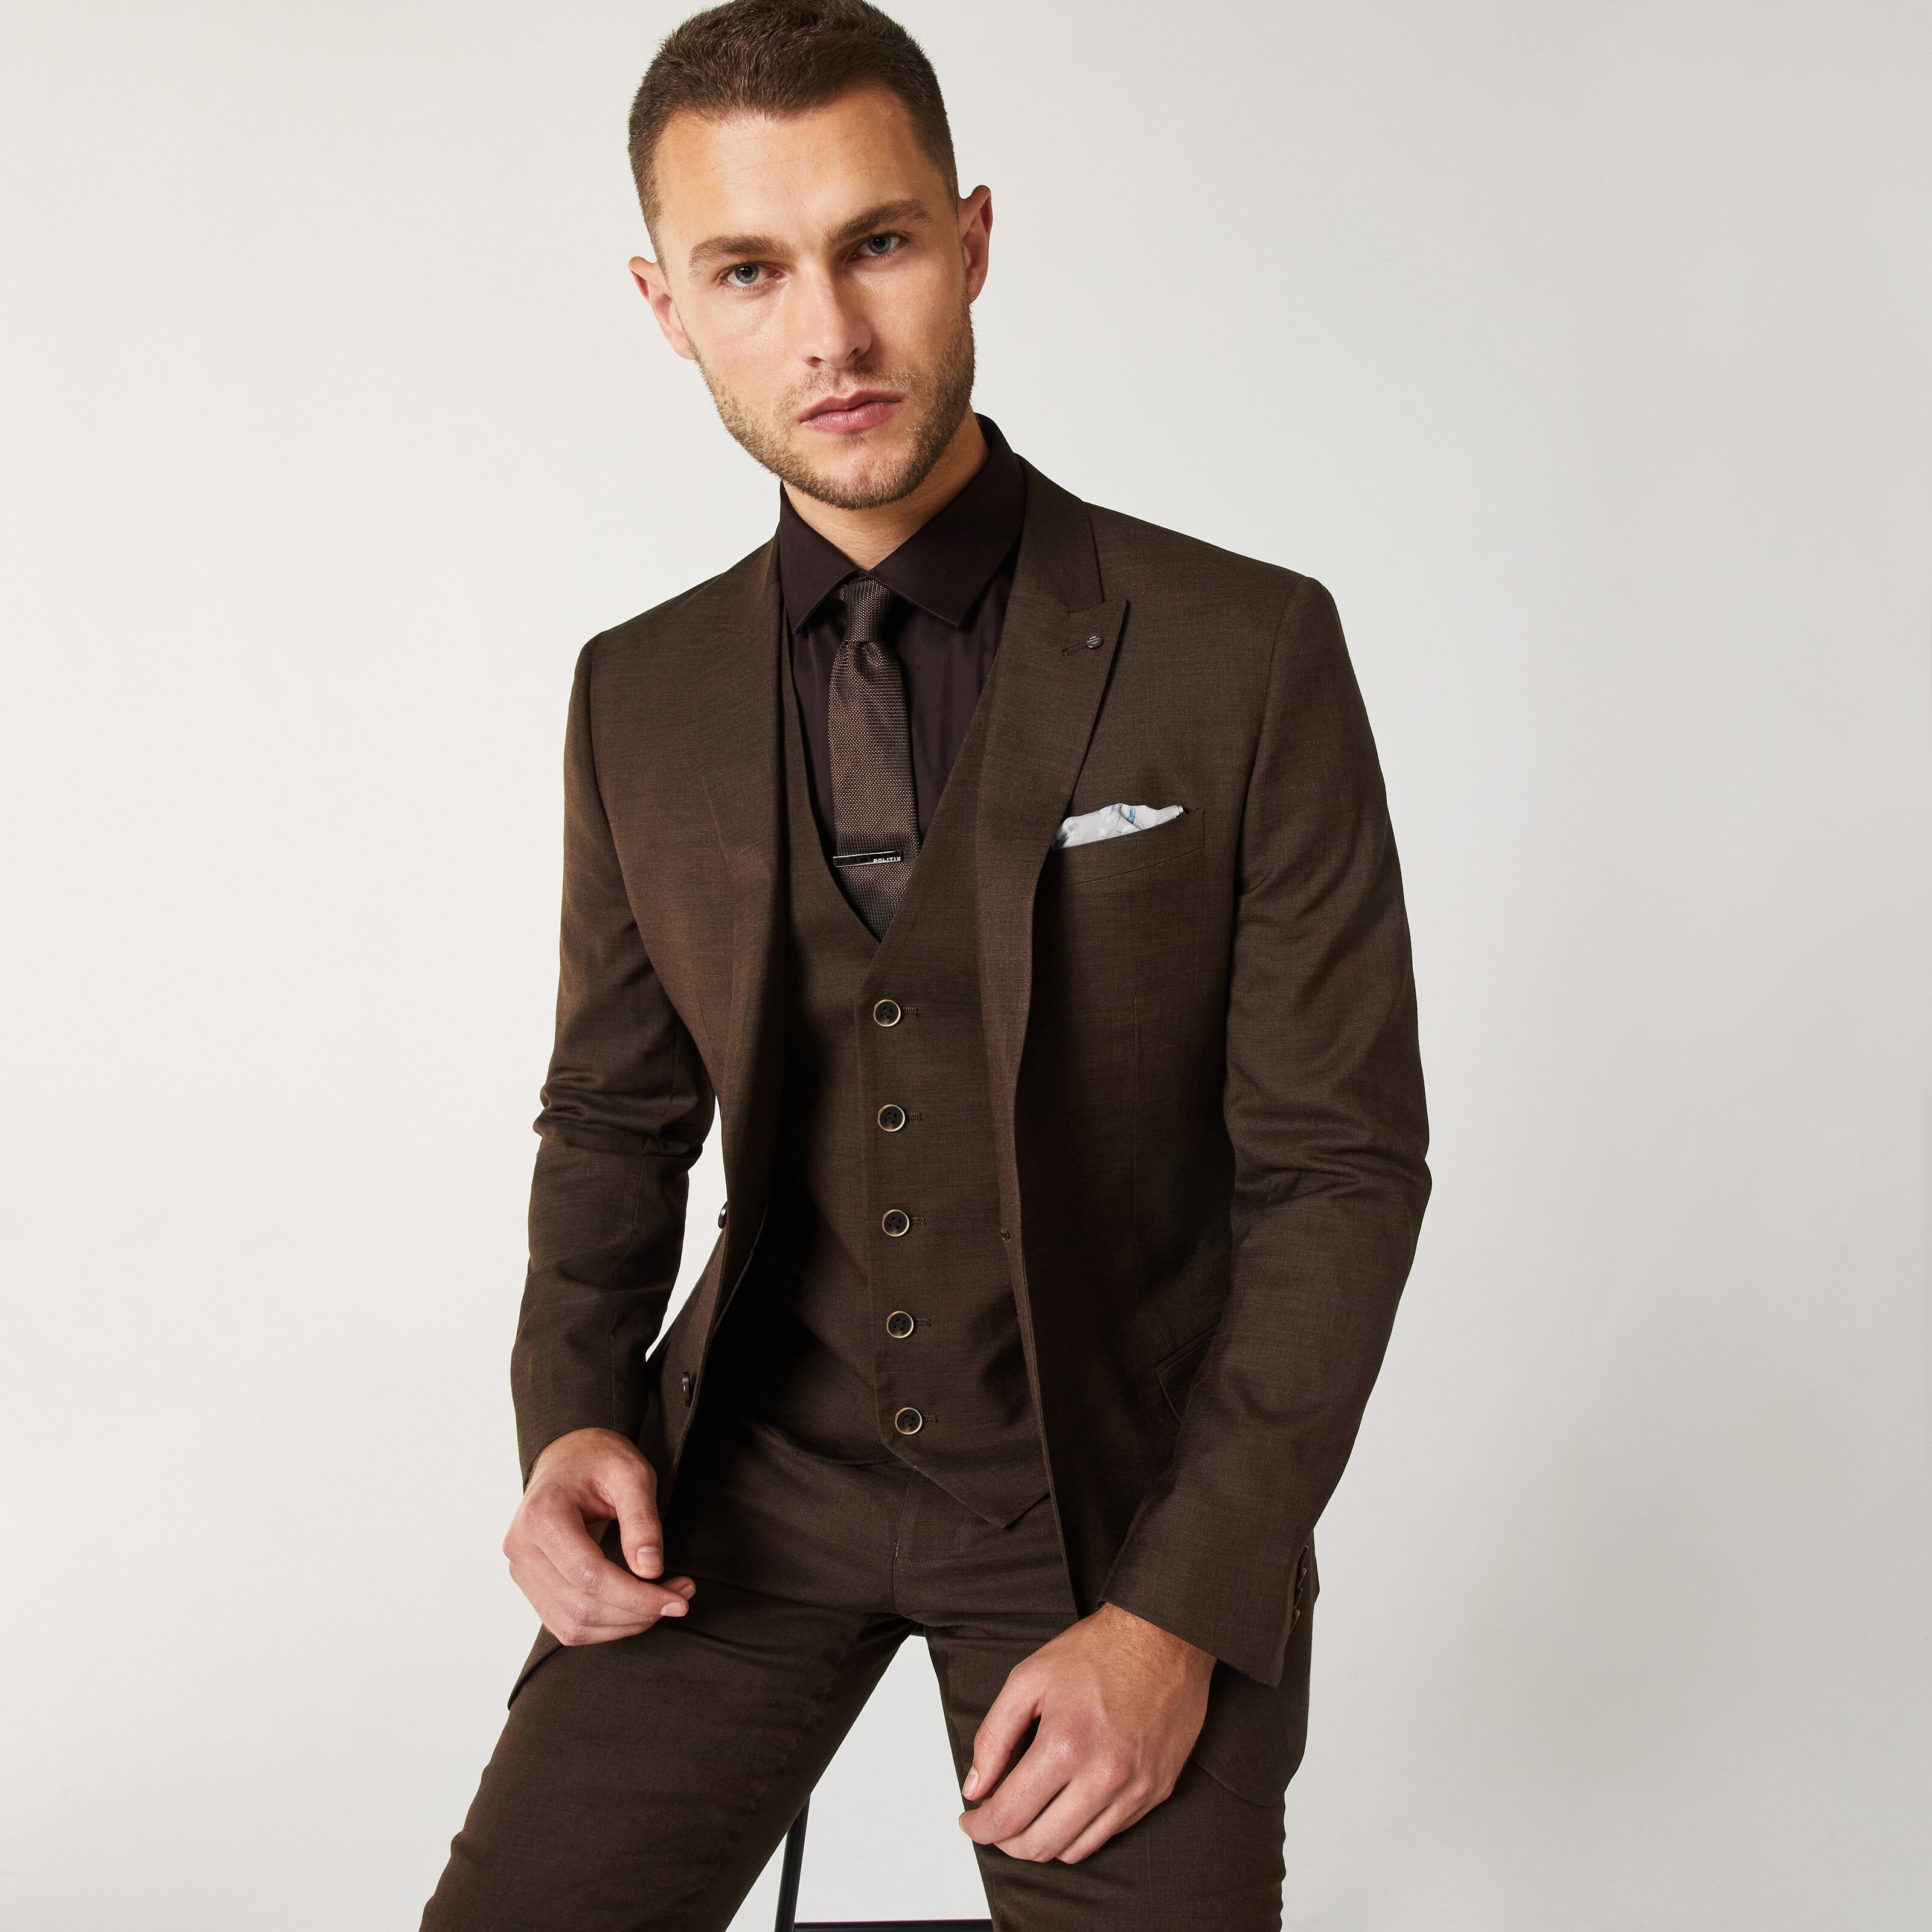 Chocolate Slim Fit Business Suit For Men Cocktail Suits For Wedding Groom  Tuxedo With Waistcoat, Trousers, Jacket, Pants, Vest, And Tie W3257s From  Lqbyc, $76.89 | DHgate.Com